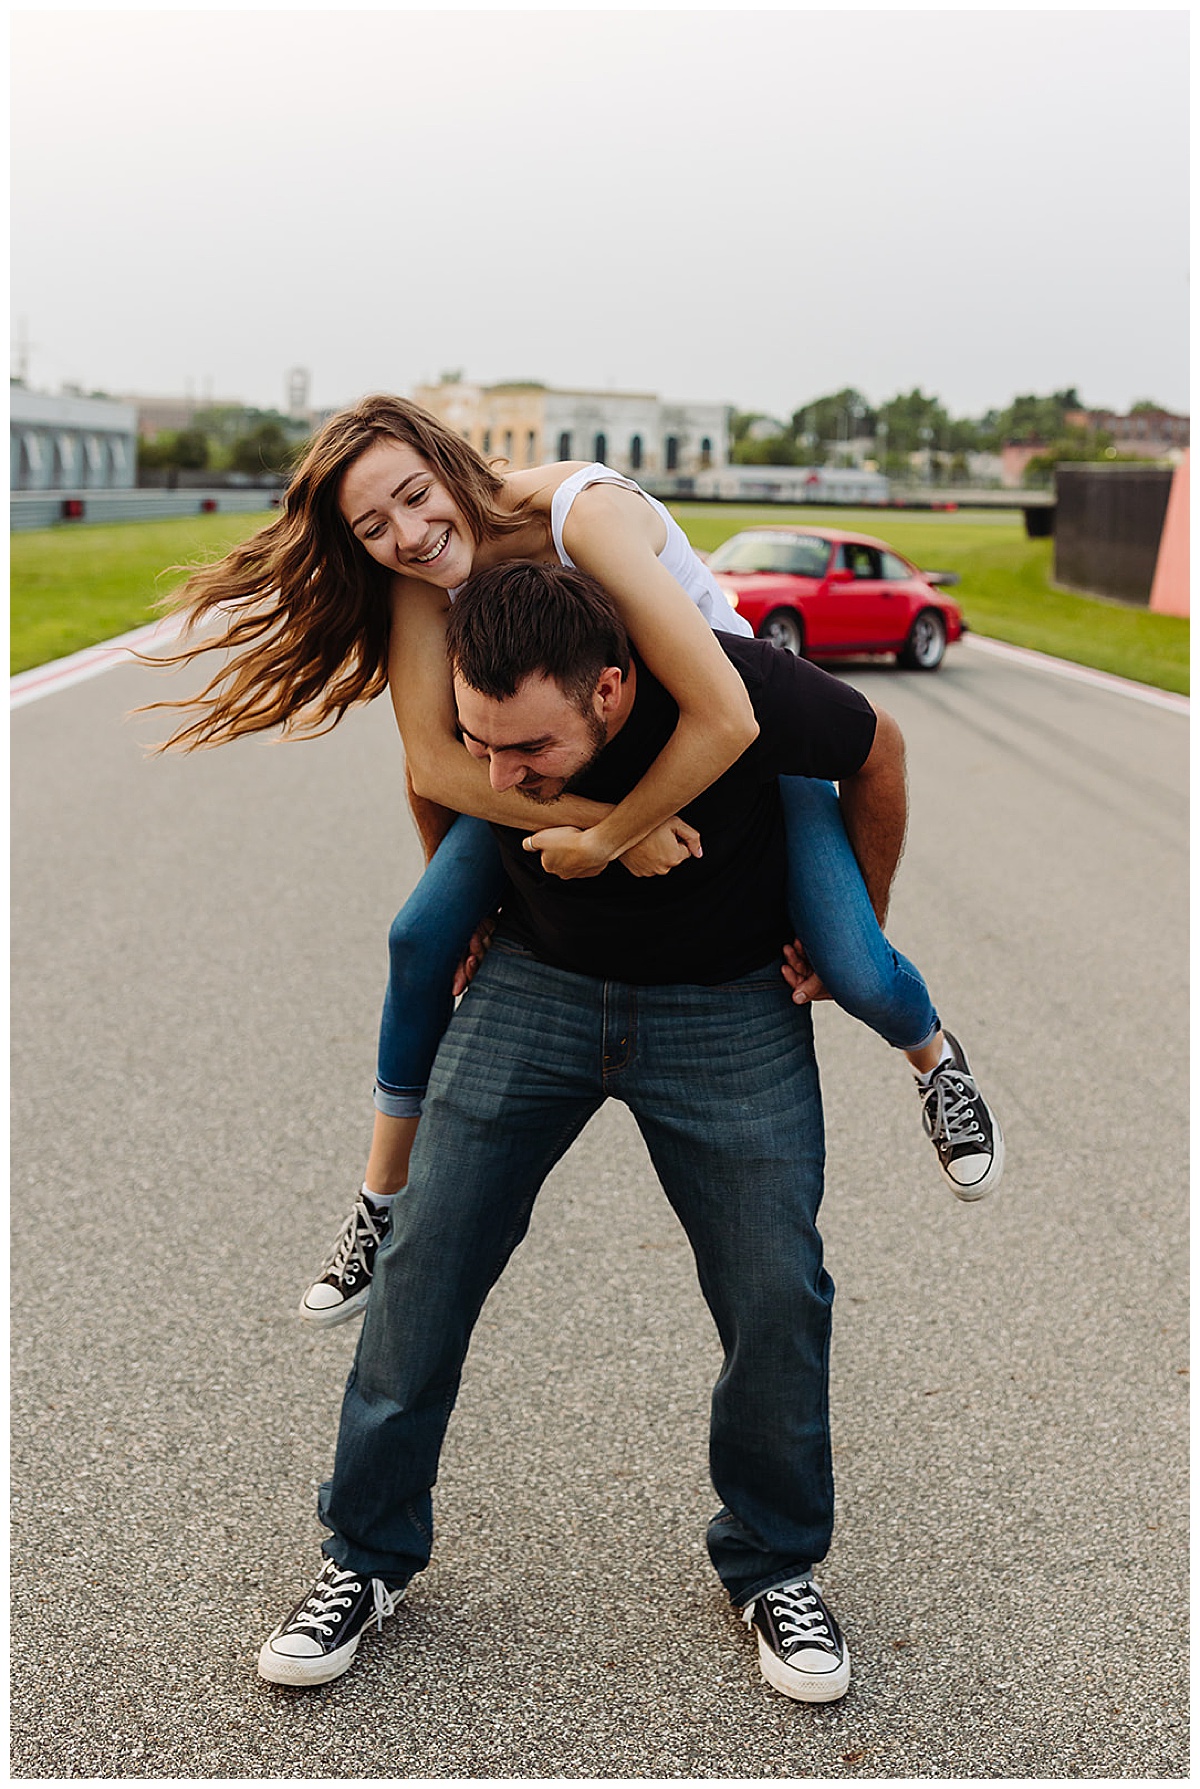 Guy gives woman piggy back ride for Kayla Bouren Photography